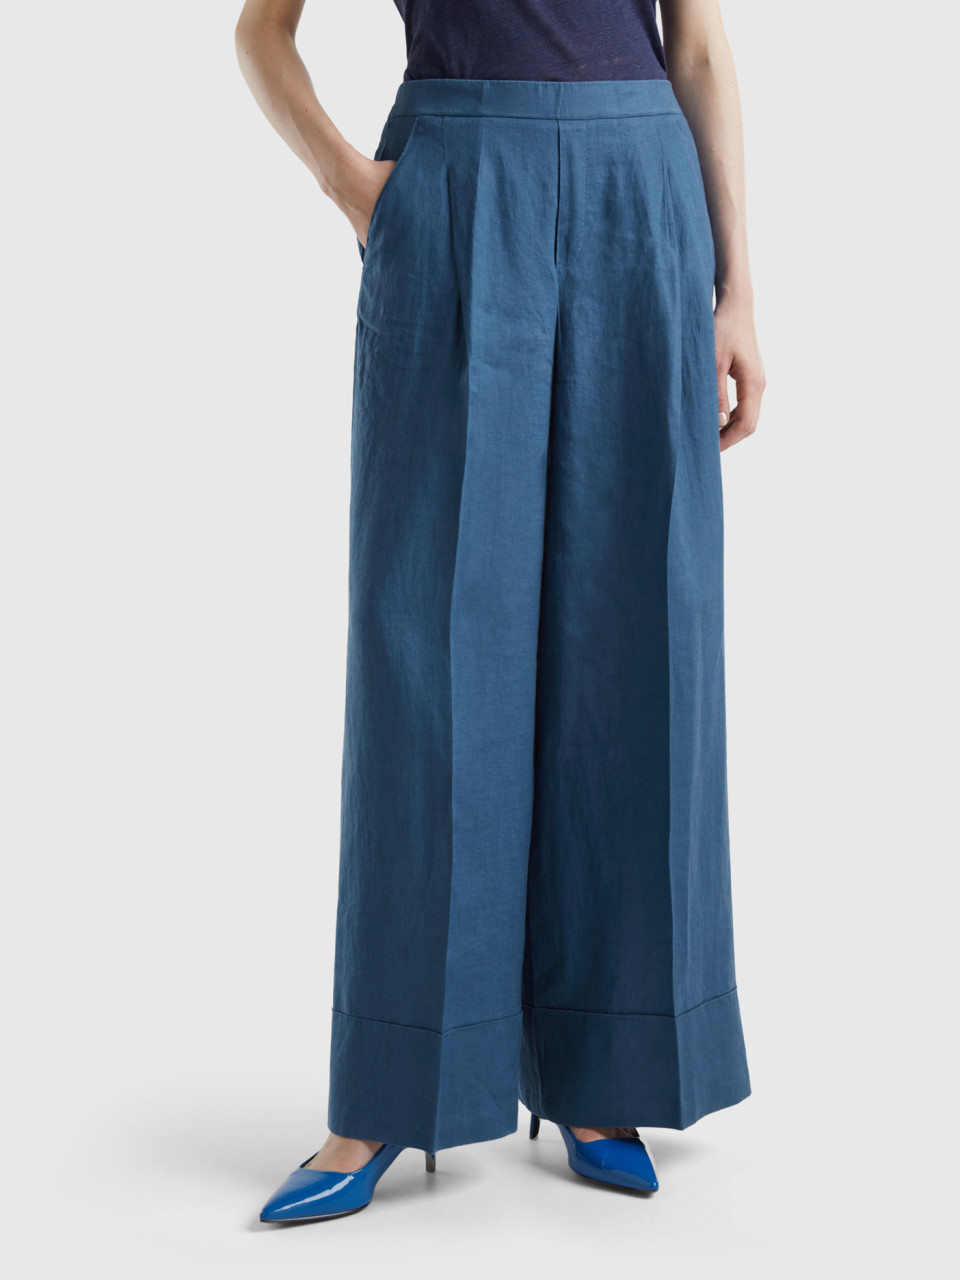 Benetton, Palazzo Trousers In 100% Linen, Air Force Blue, Women